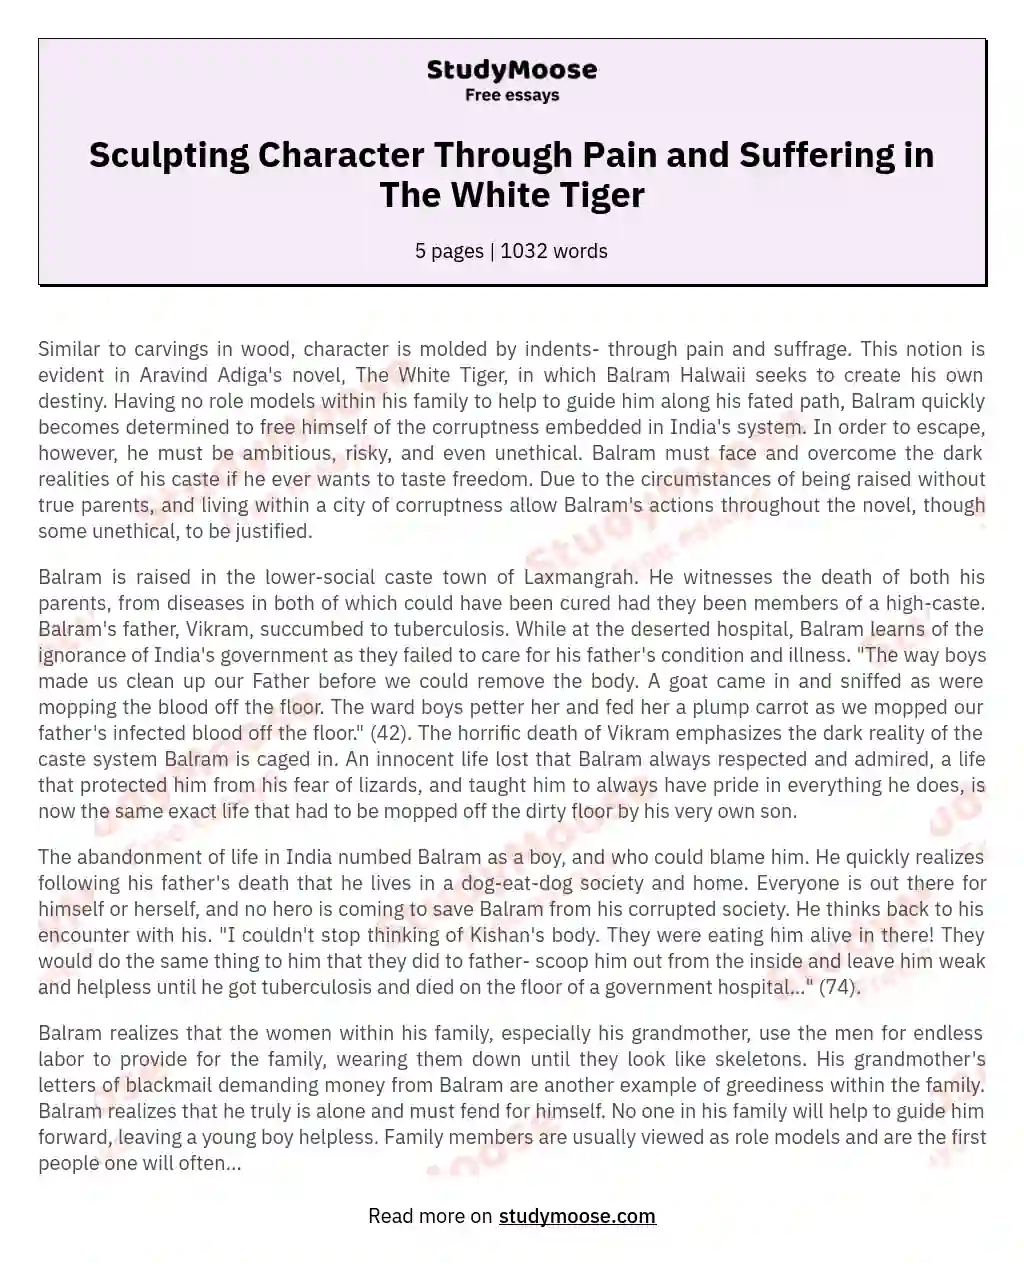 Sculpting Character Through Pain and Suffering in The White Tiger essay